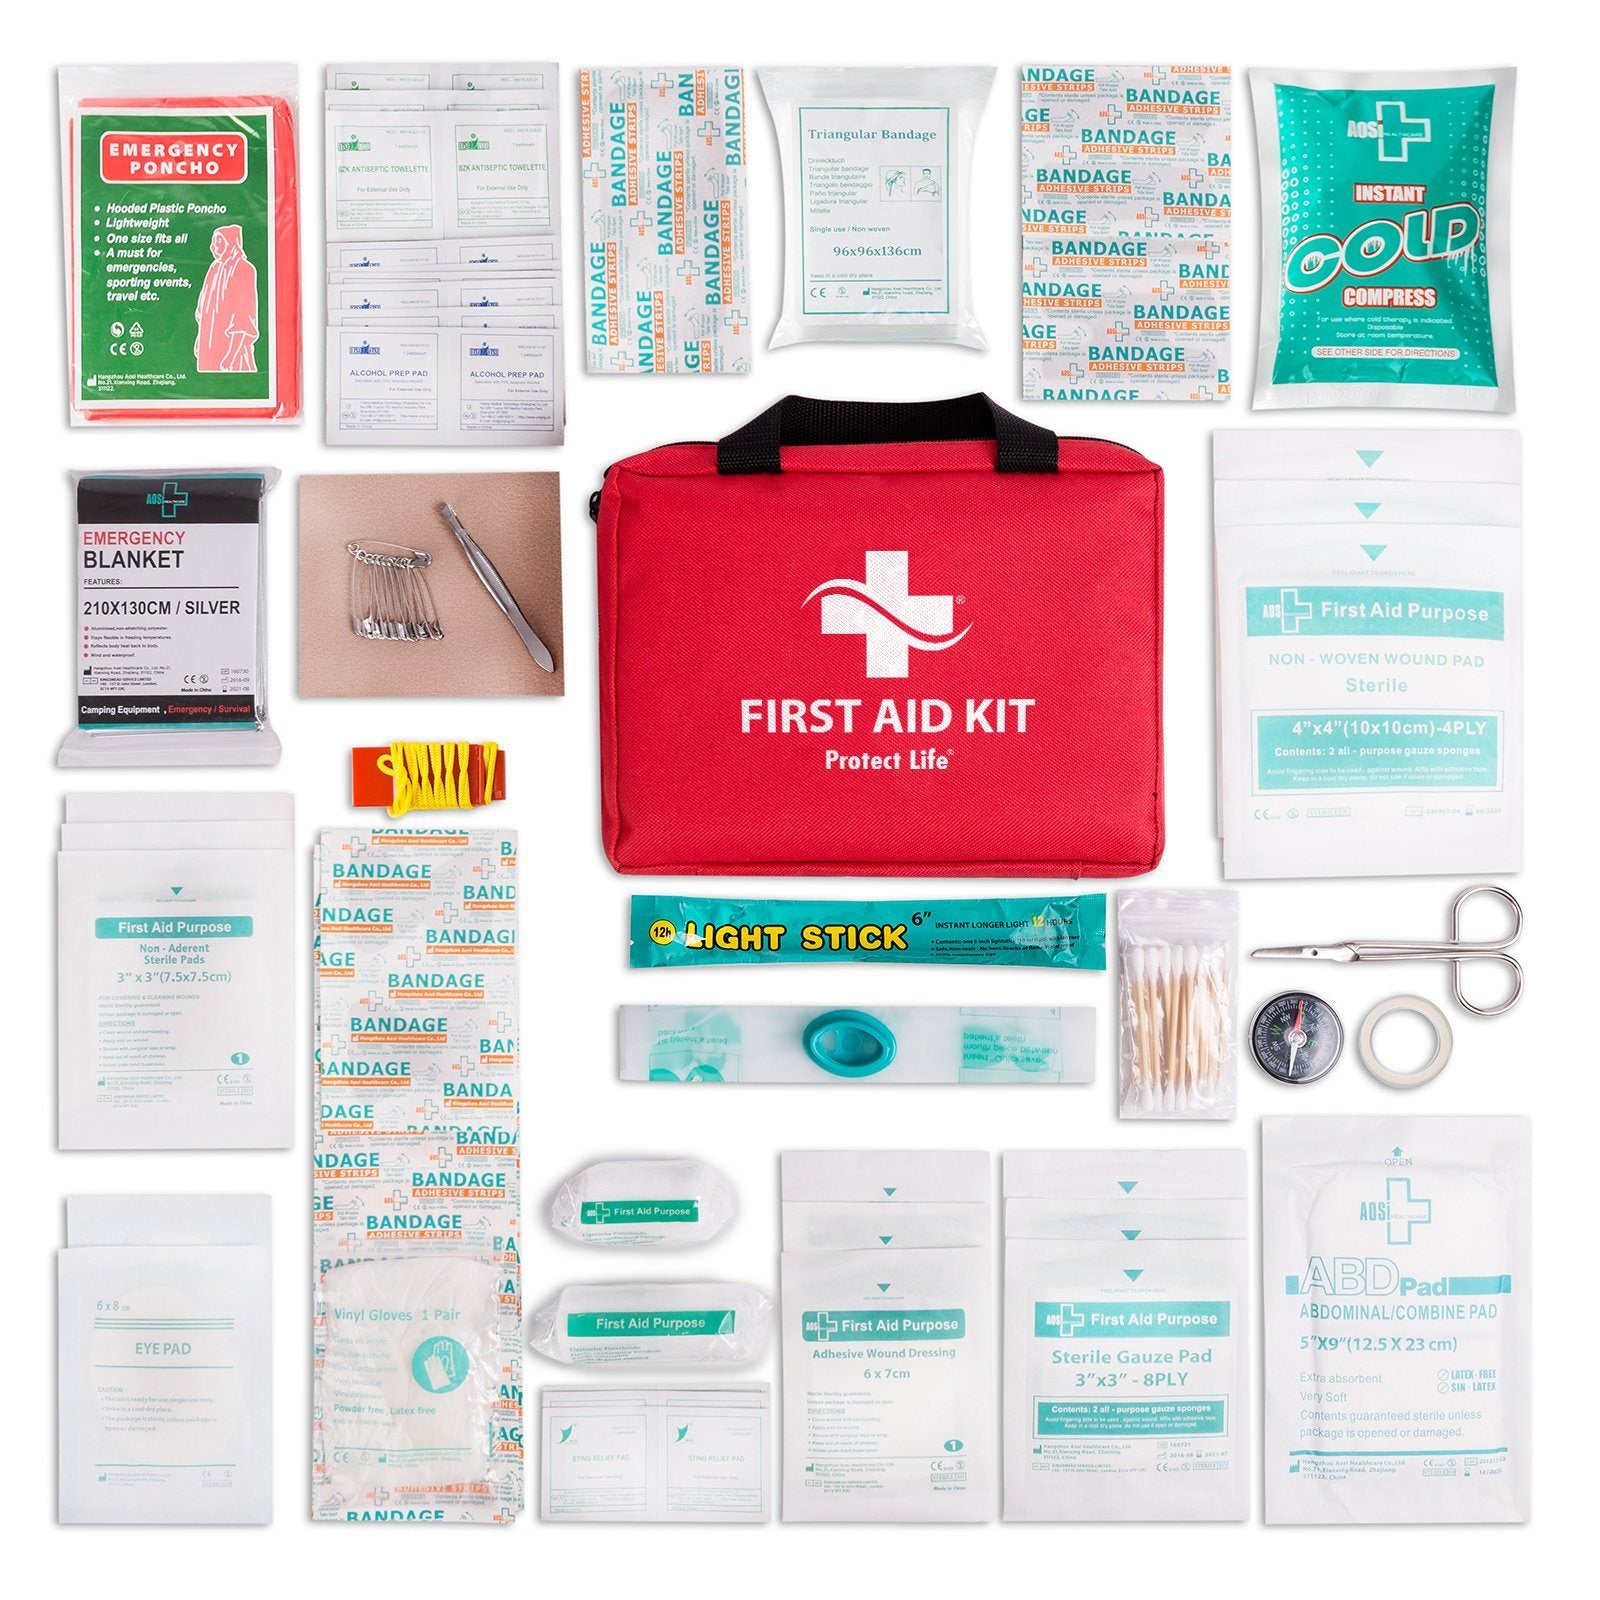 First Aid Kit - 200 Piece - for Car, Home, Travel, Camping, Office or Sports 